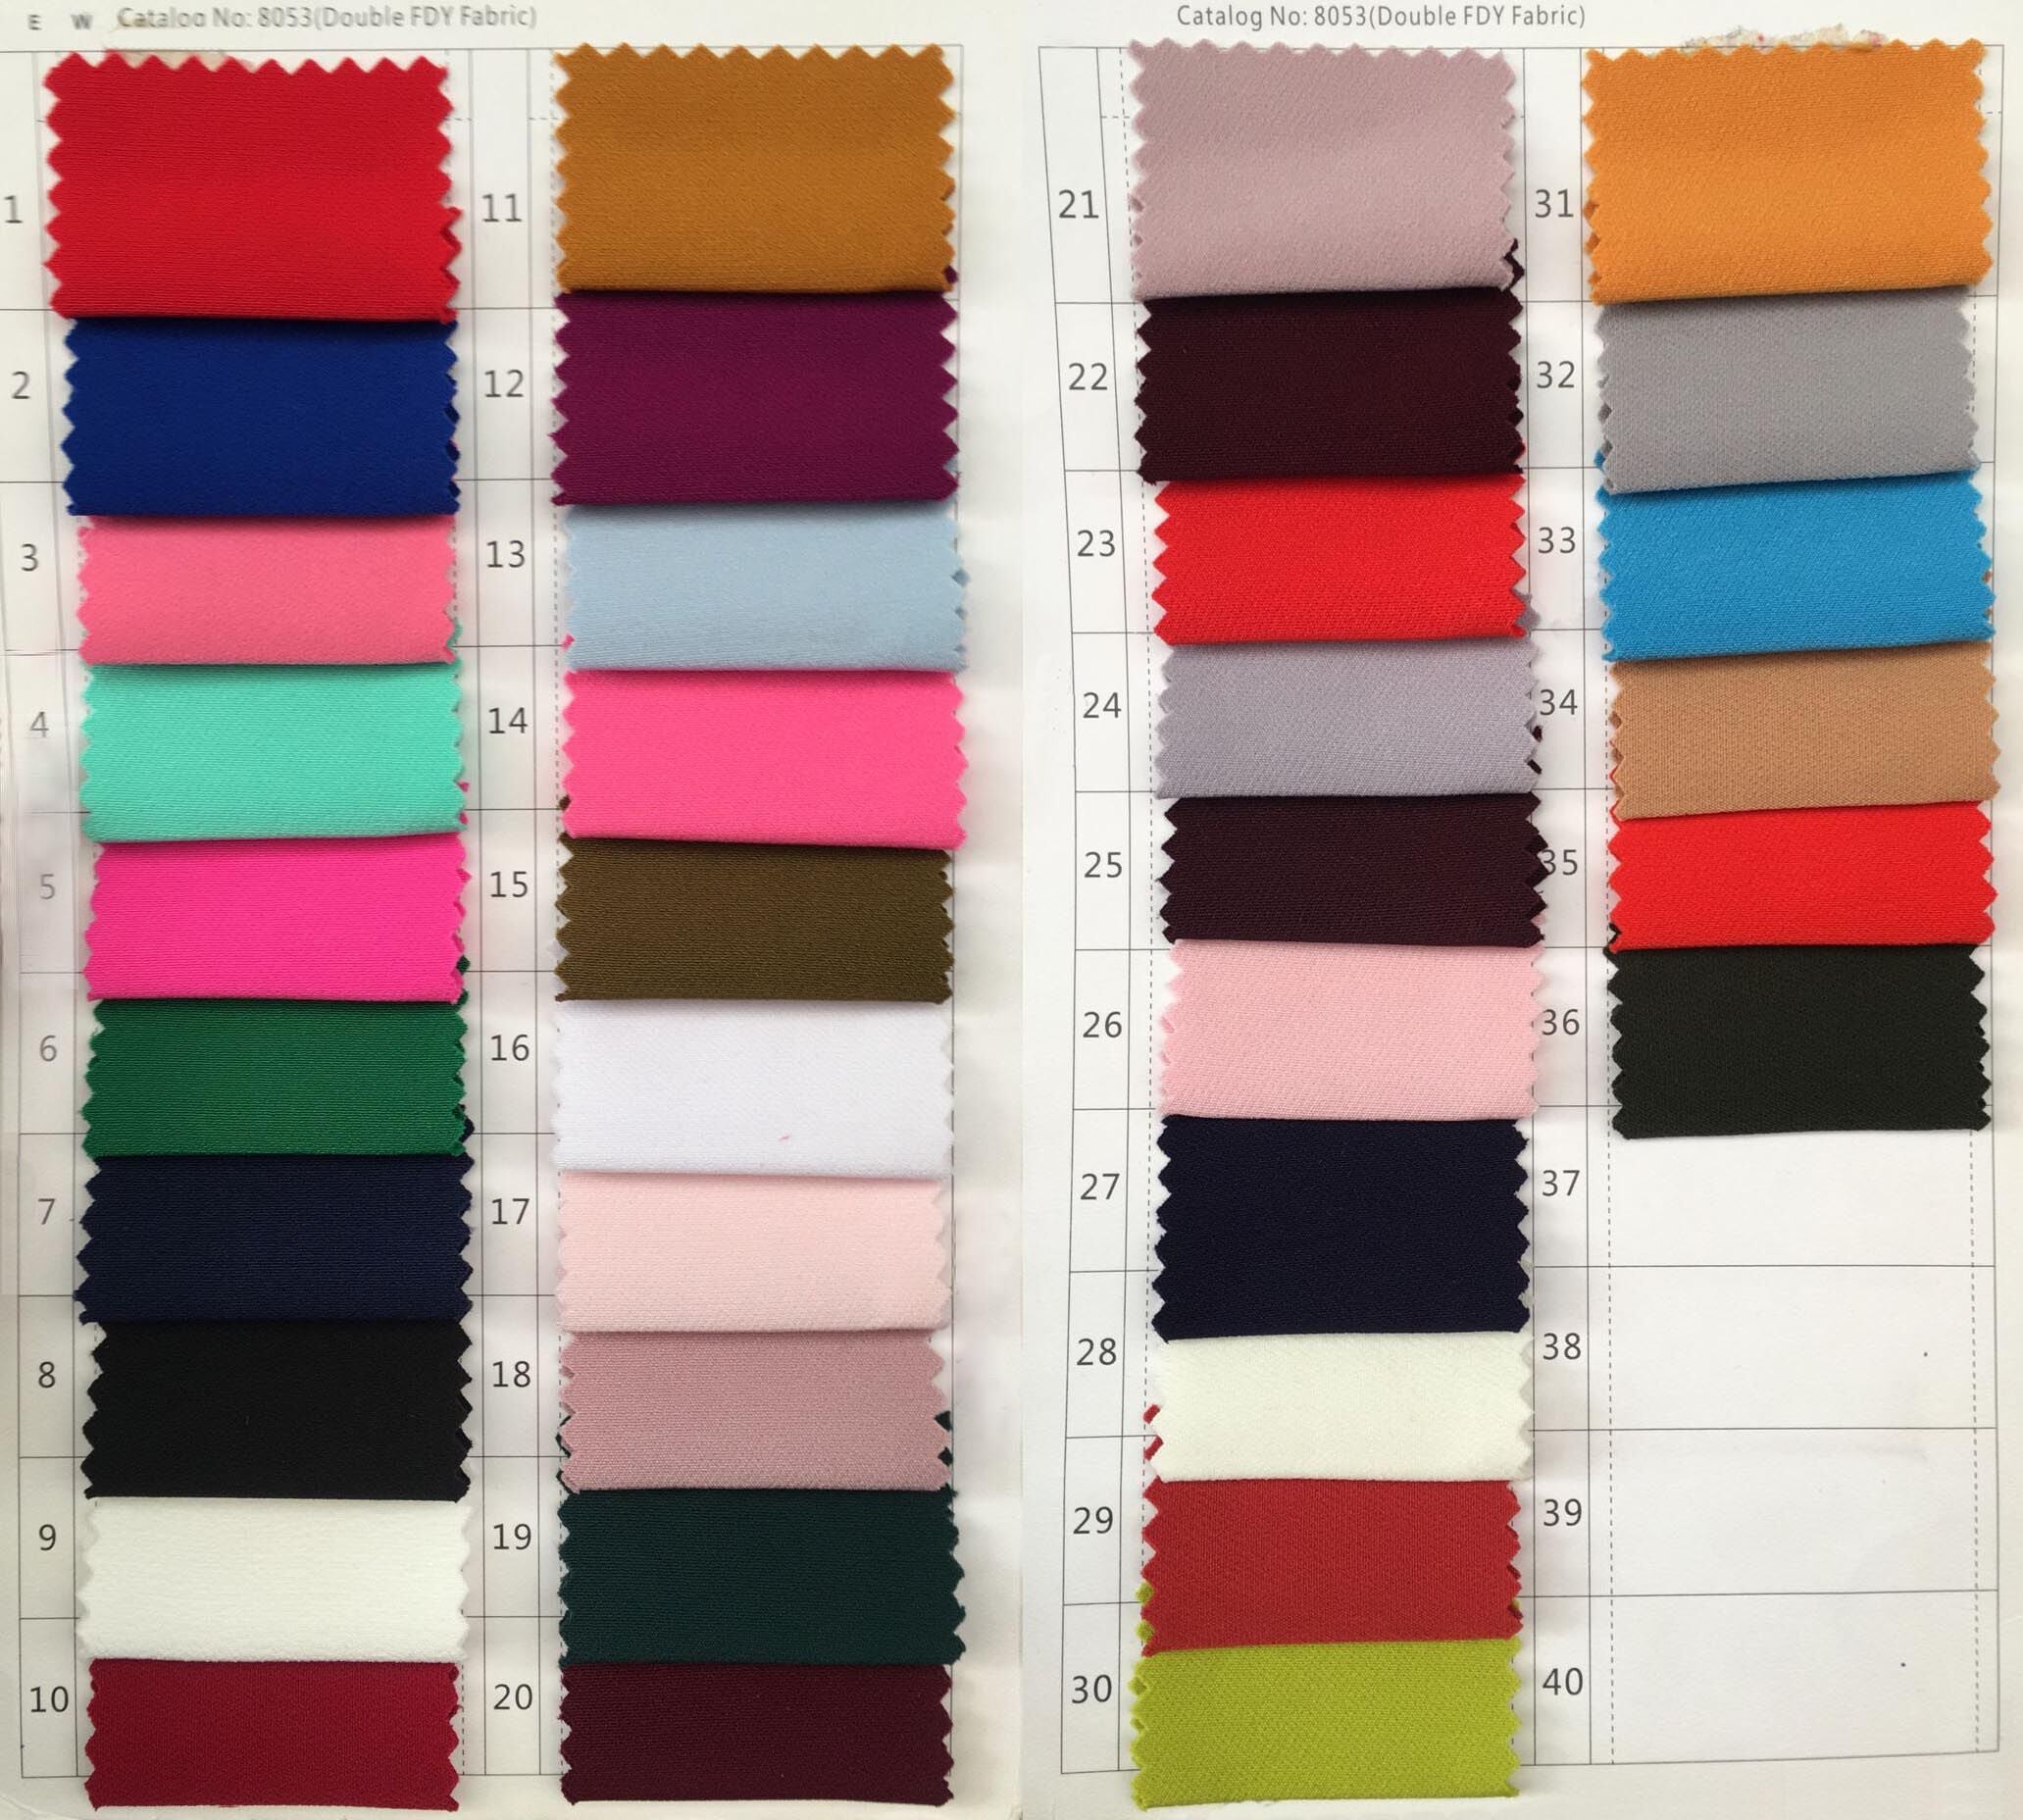 Fabric Swatches(fabrics are free, only need to buy it once)